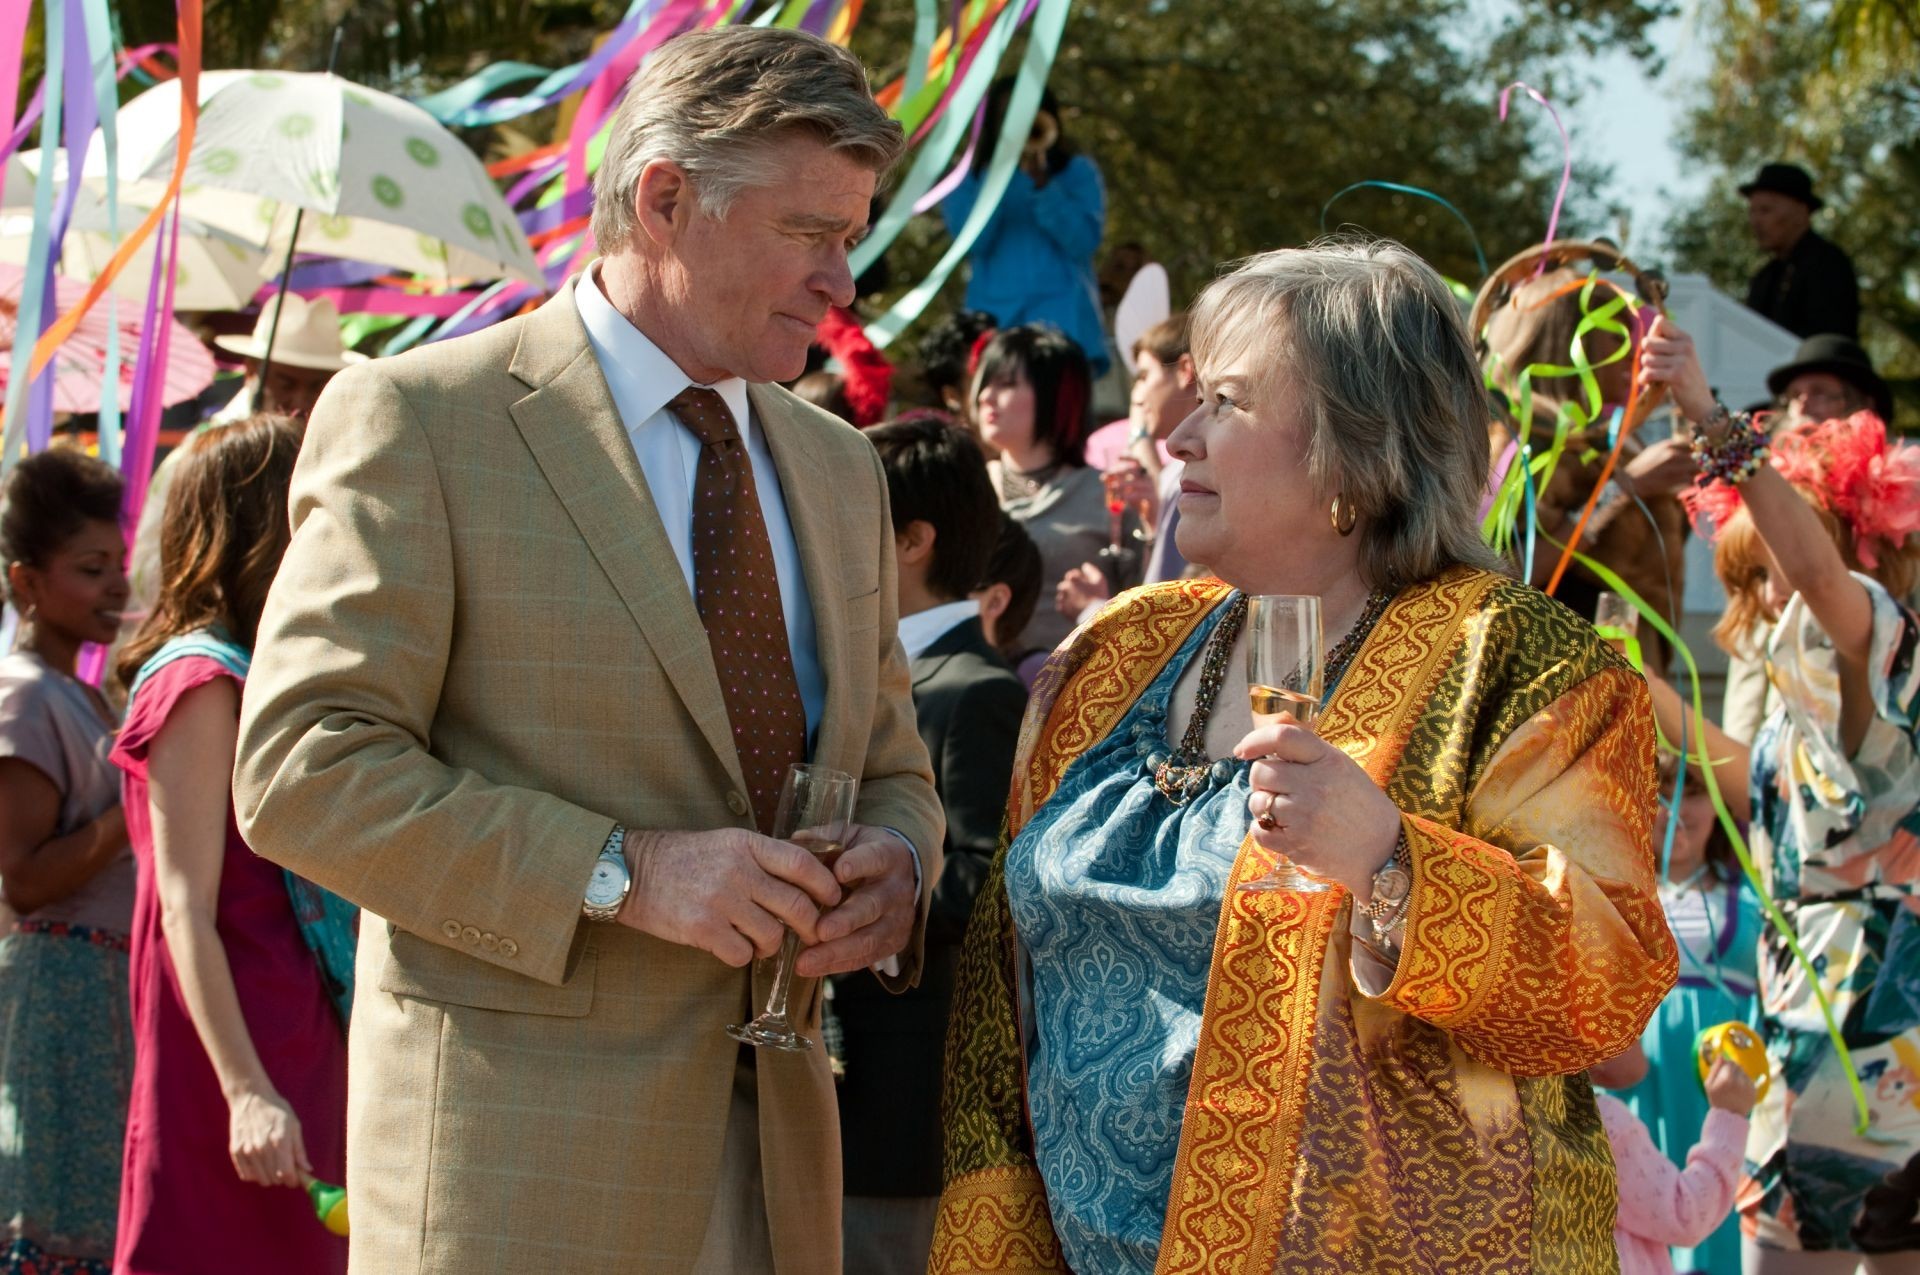 Treat Williams stars as Jack Corbett and Kathy Bates stars as Beverly Corbett in Millennium Entertainment's A Little Bit of Heaven (2012). Photo credit by Patti Perret.